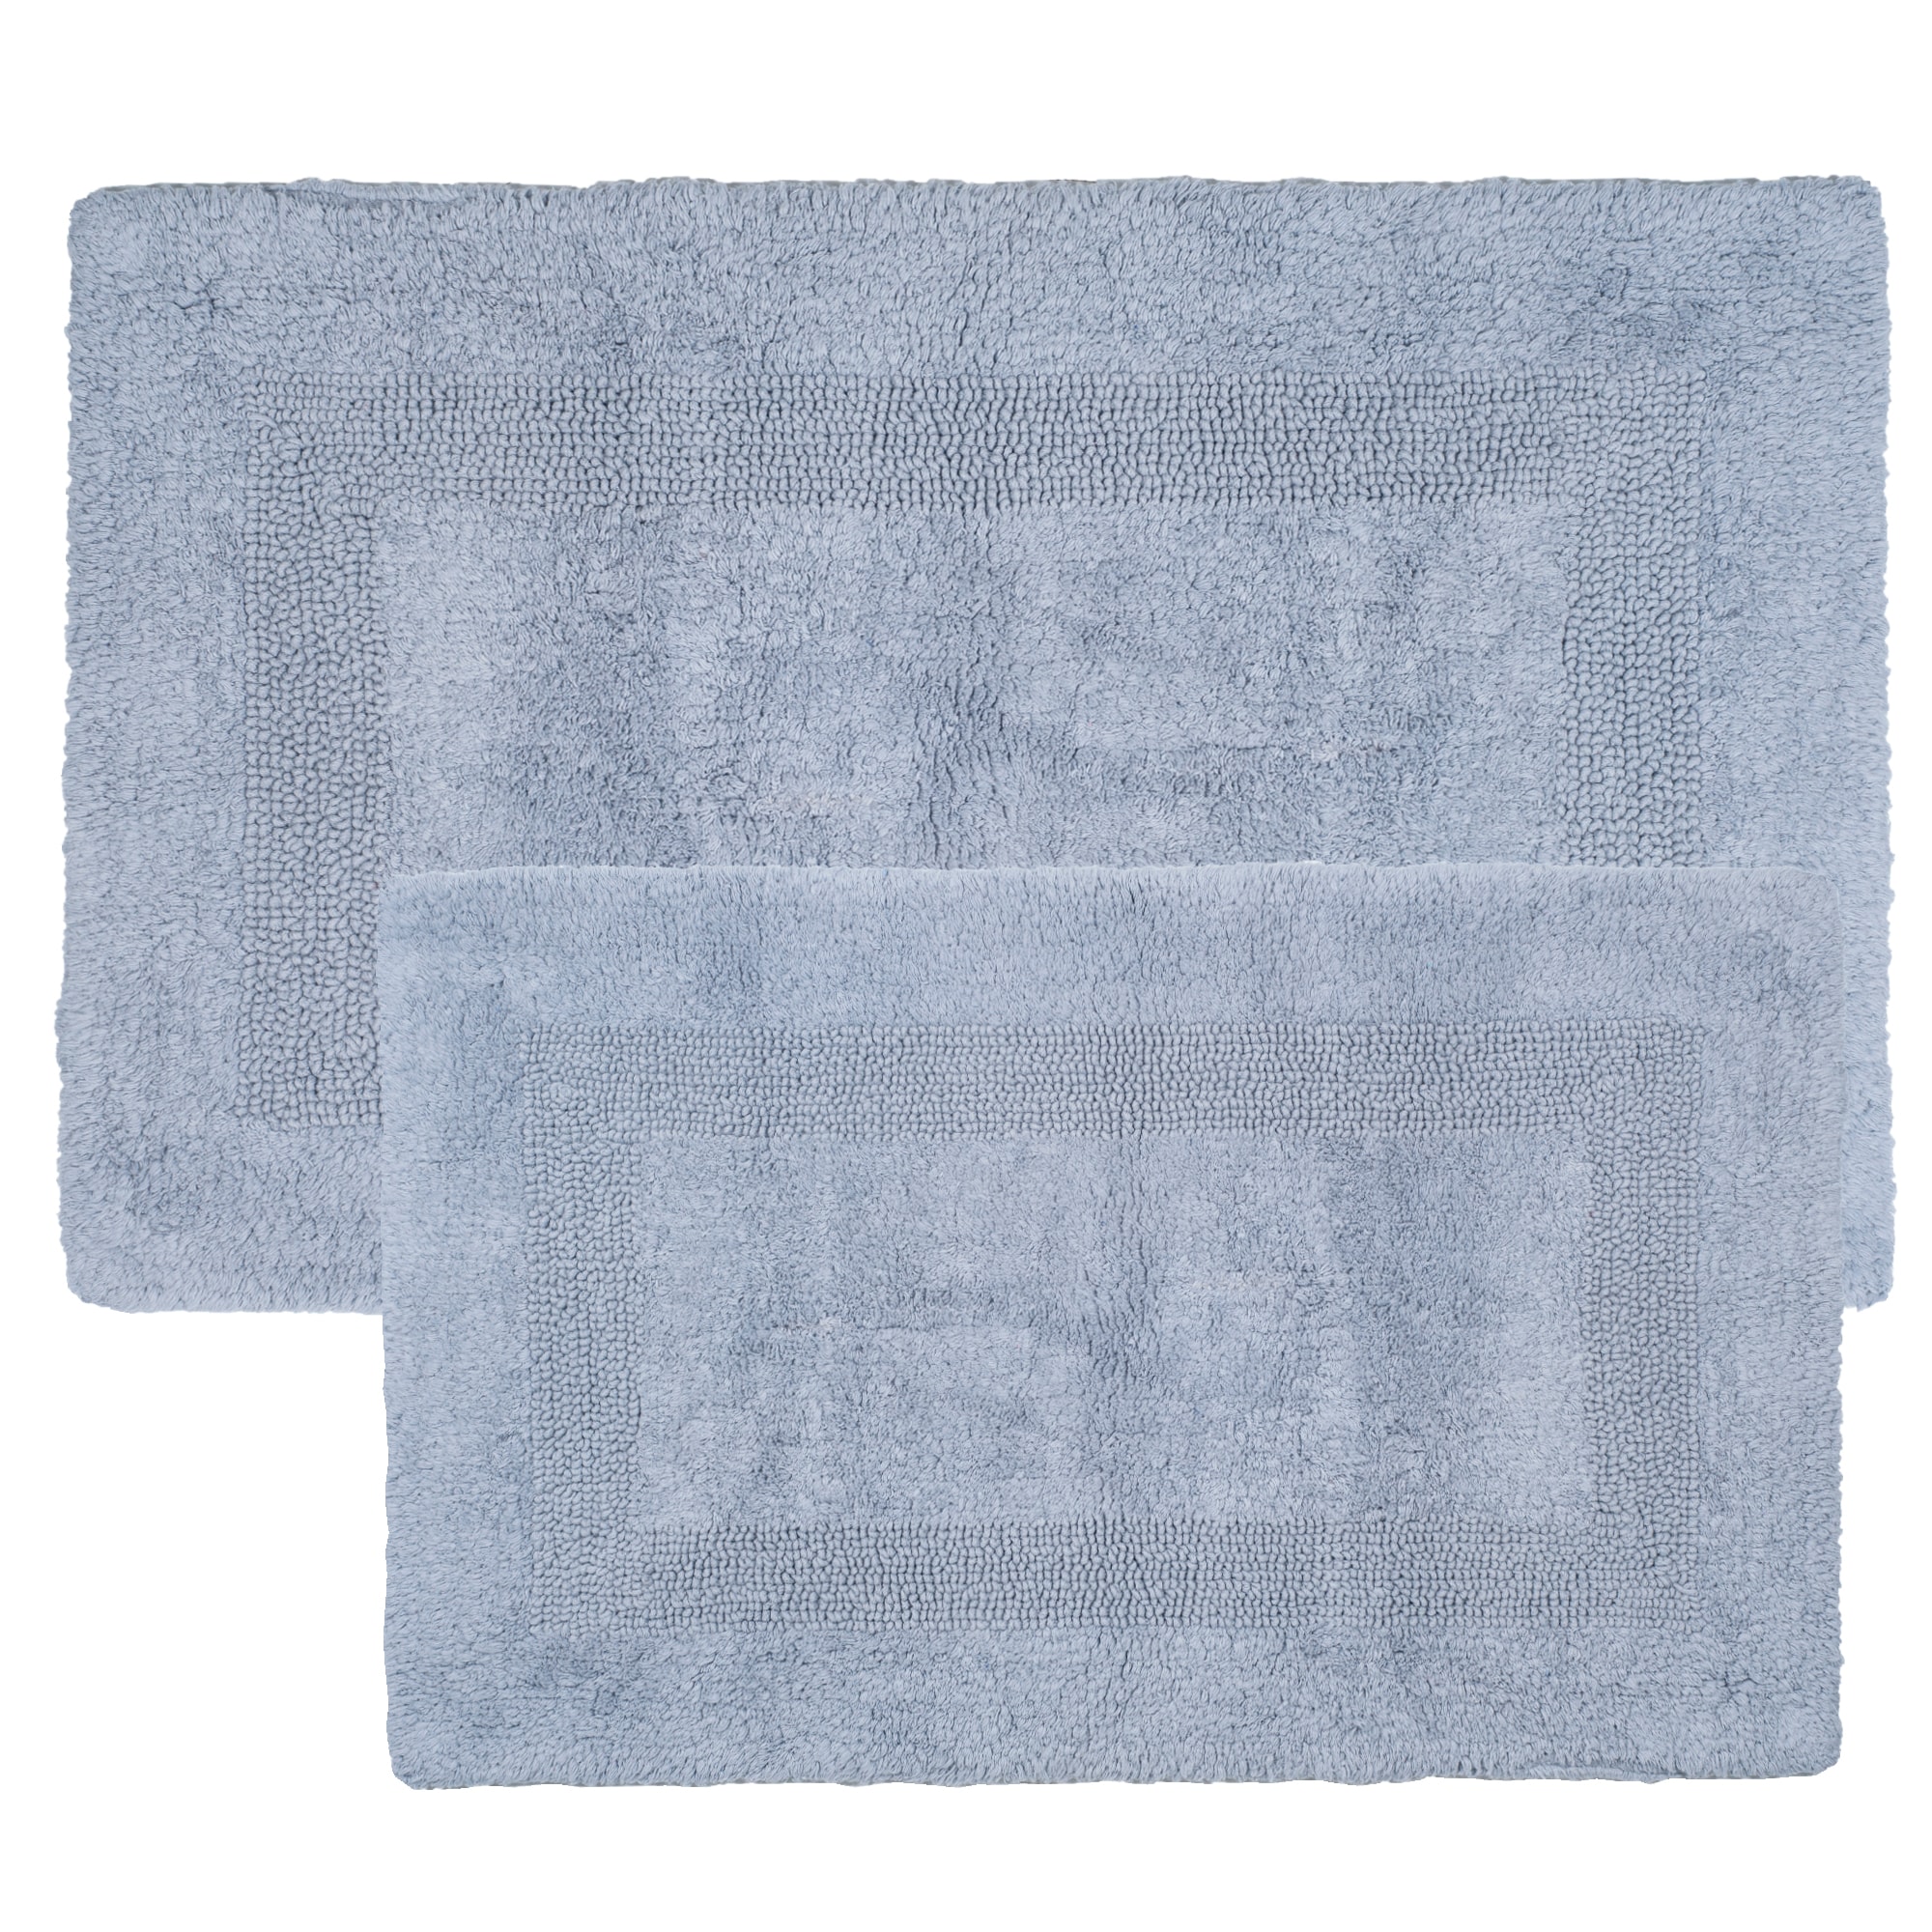 Hastings Home Bathroom Mats 22-in x 35-in Chocolate Cotton Bath